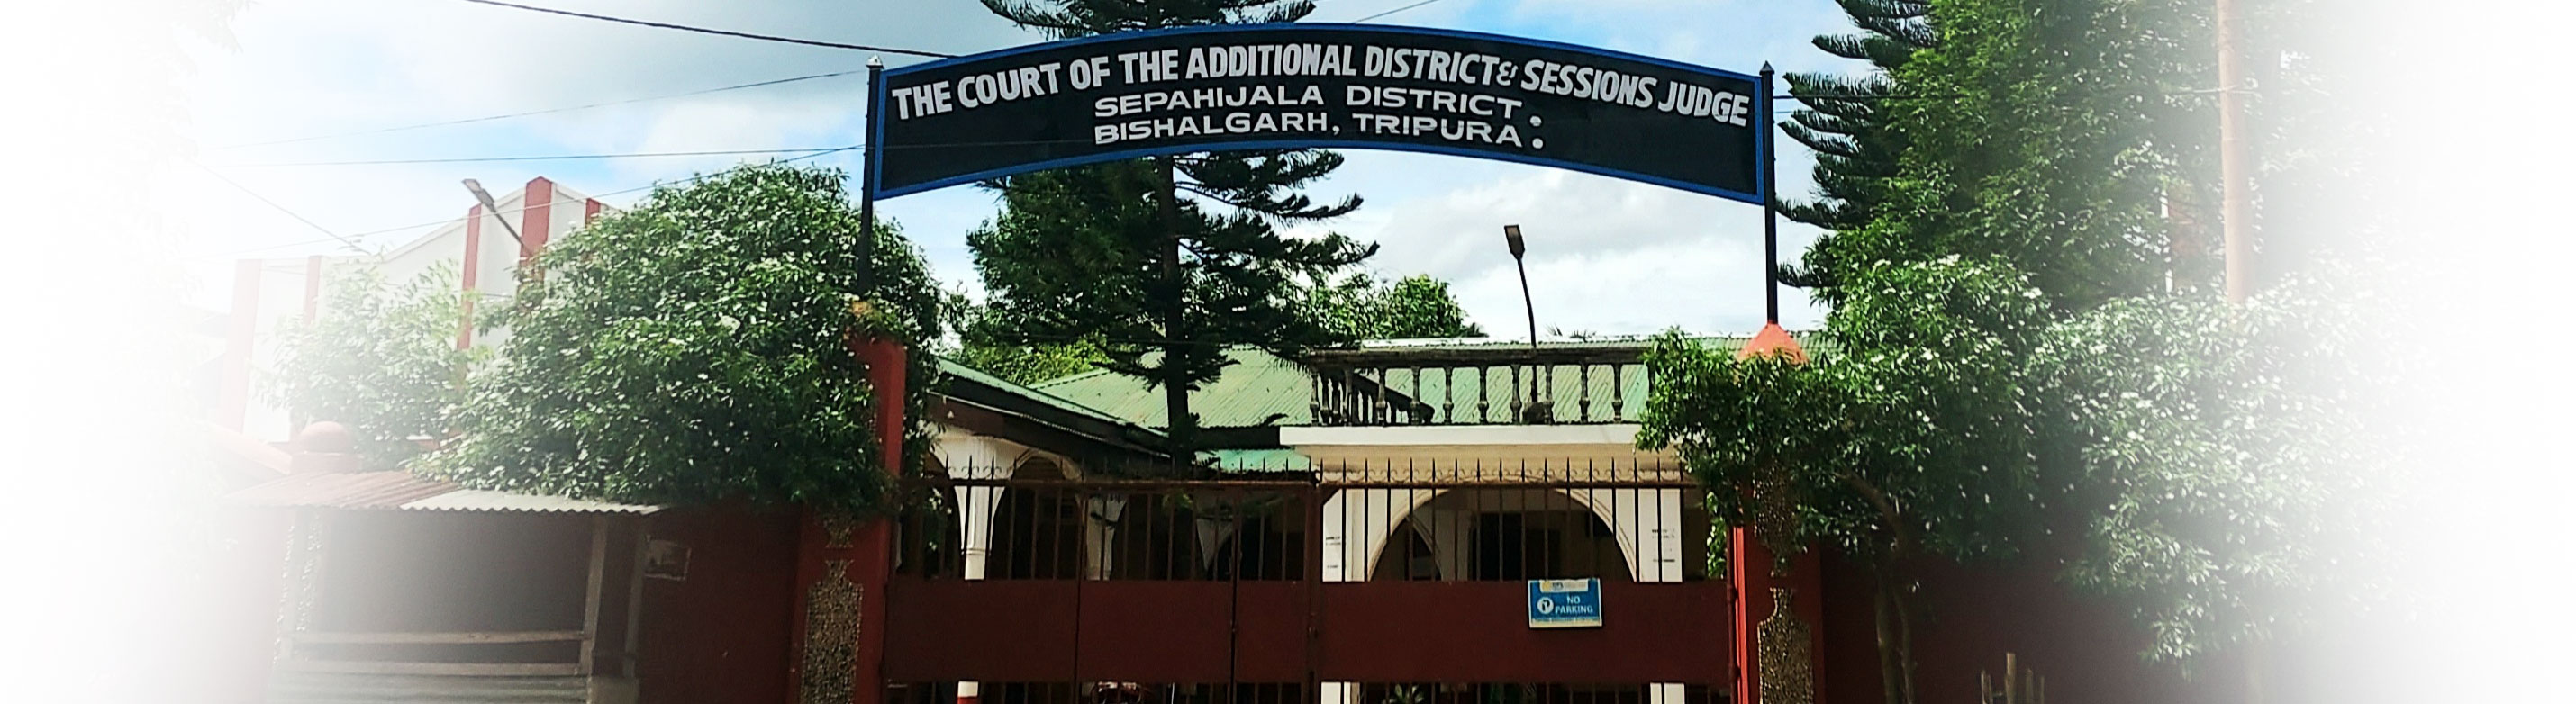 Bishalgarh Court Complex, Court of Addl. District and Sessions Judge